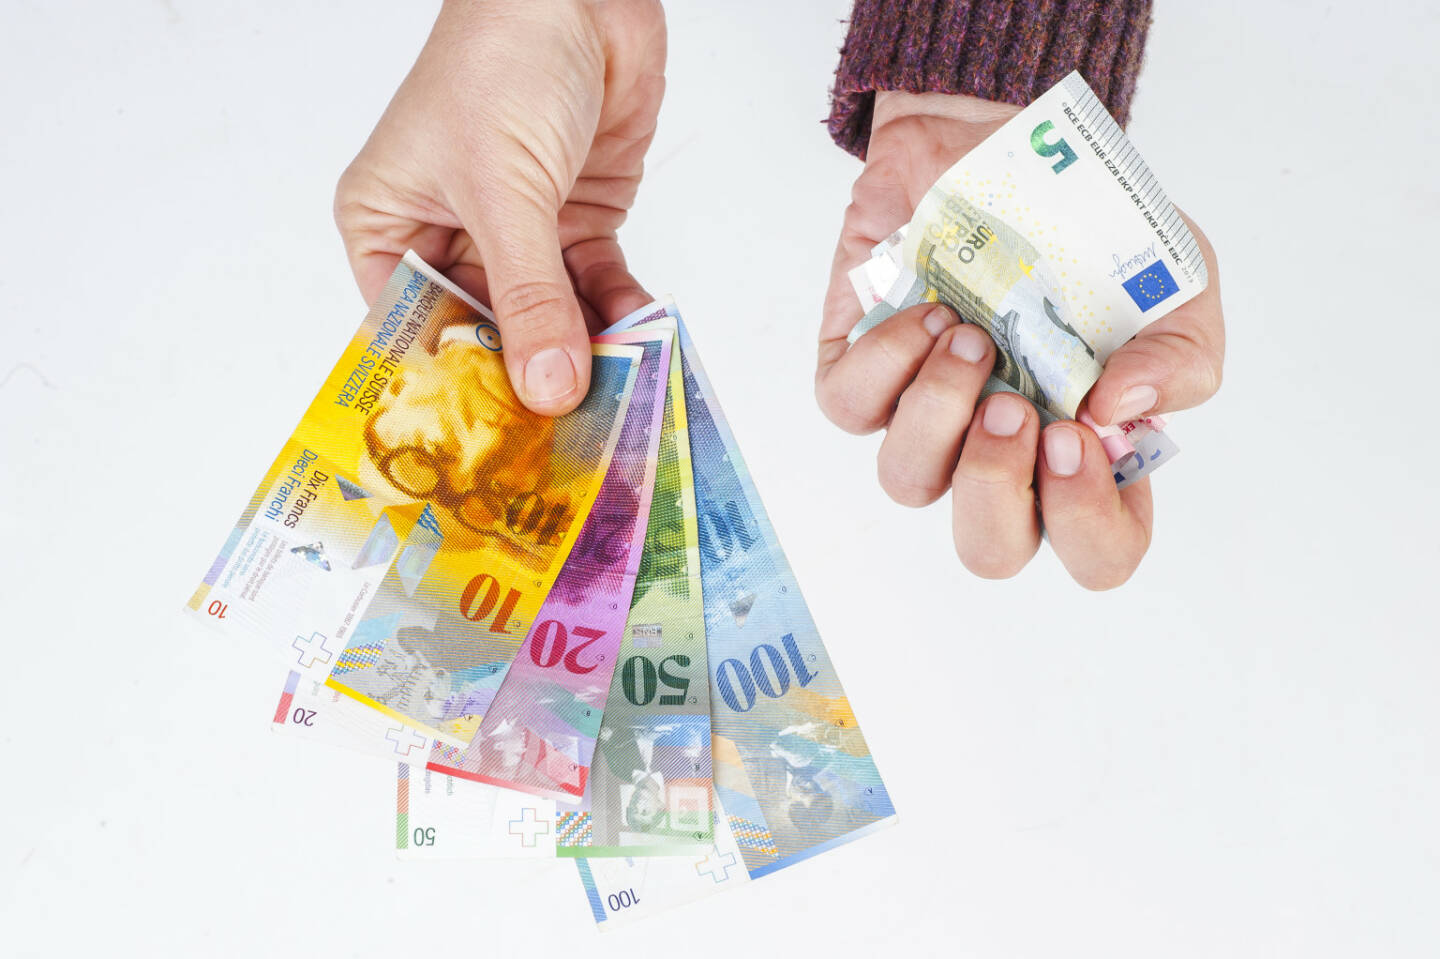 Franken, Euro, EUR/CHF, zerknüllte Euro http://www.shutterstock.com/de/pic-244638901/stock-photo-female-hand-holding-banknotes-swiss-franc-and-the-second-crumpled-euro-banknotes.html